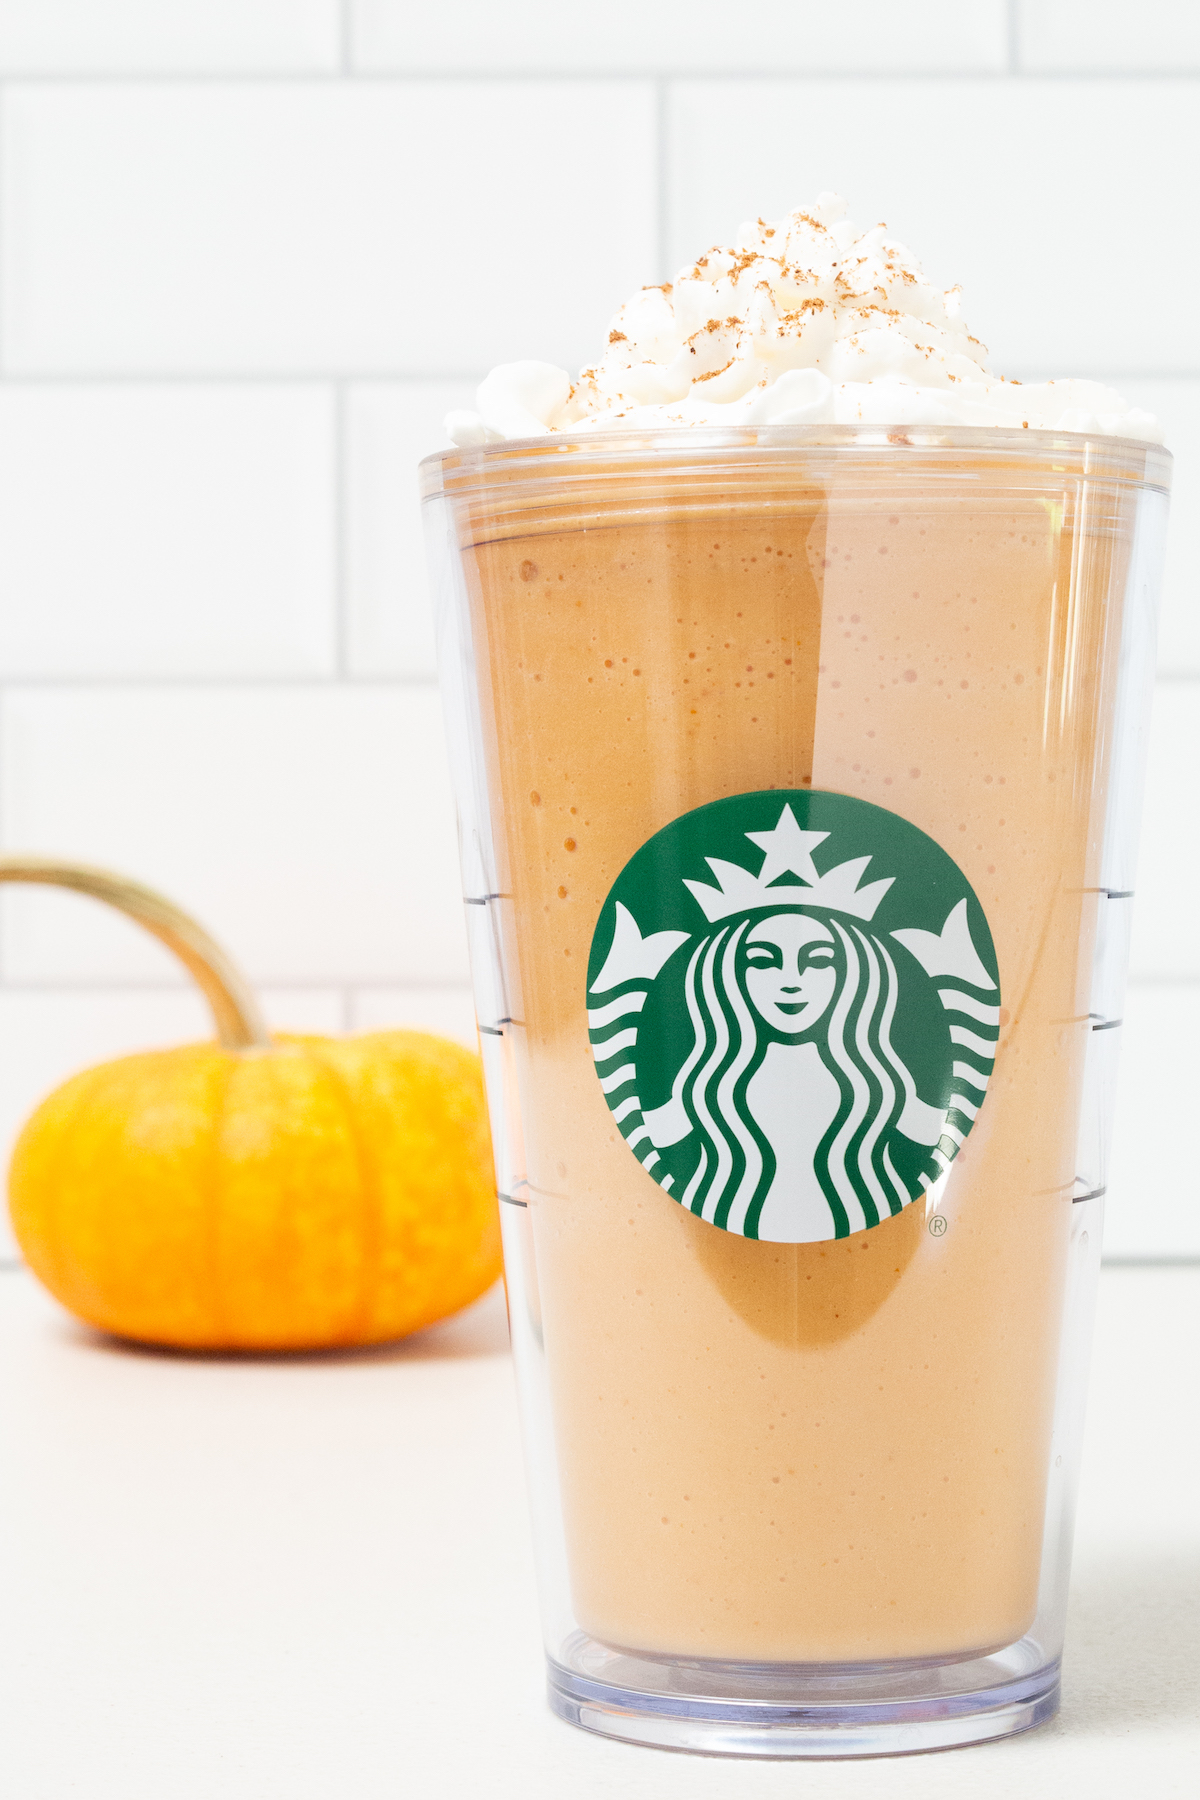 A tall plastic Starbucks tumbler is filled with pumpkin spice frappuccino that's been topped with whipped cream and pumpkin pie spice. A small orange pumpkin is out of focus in the background.